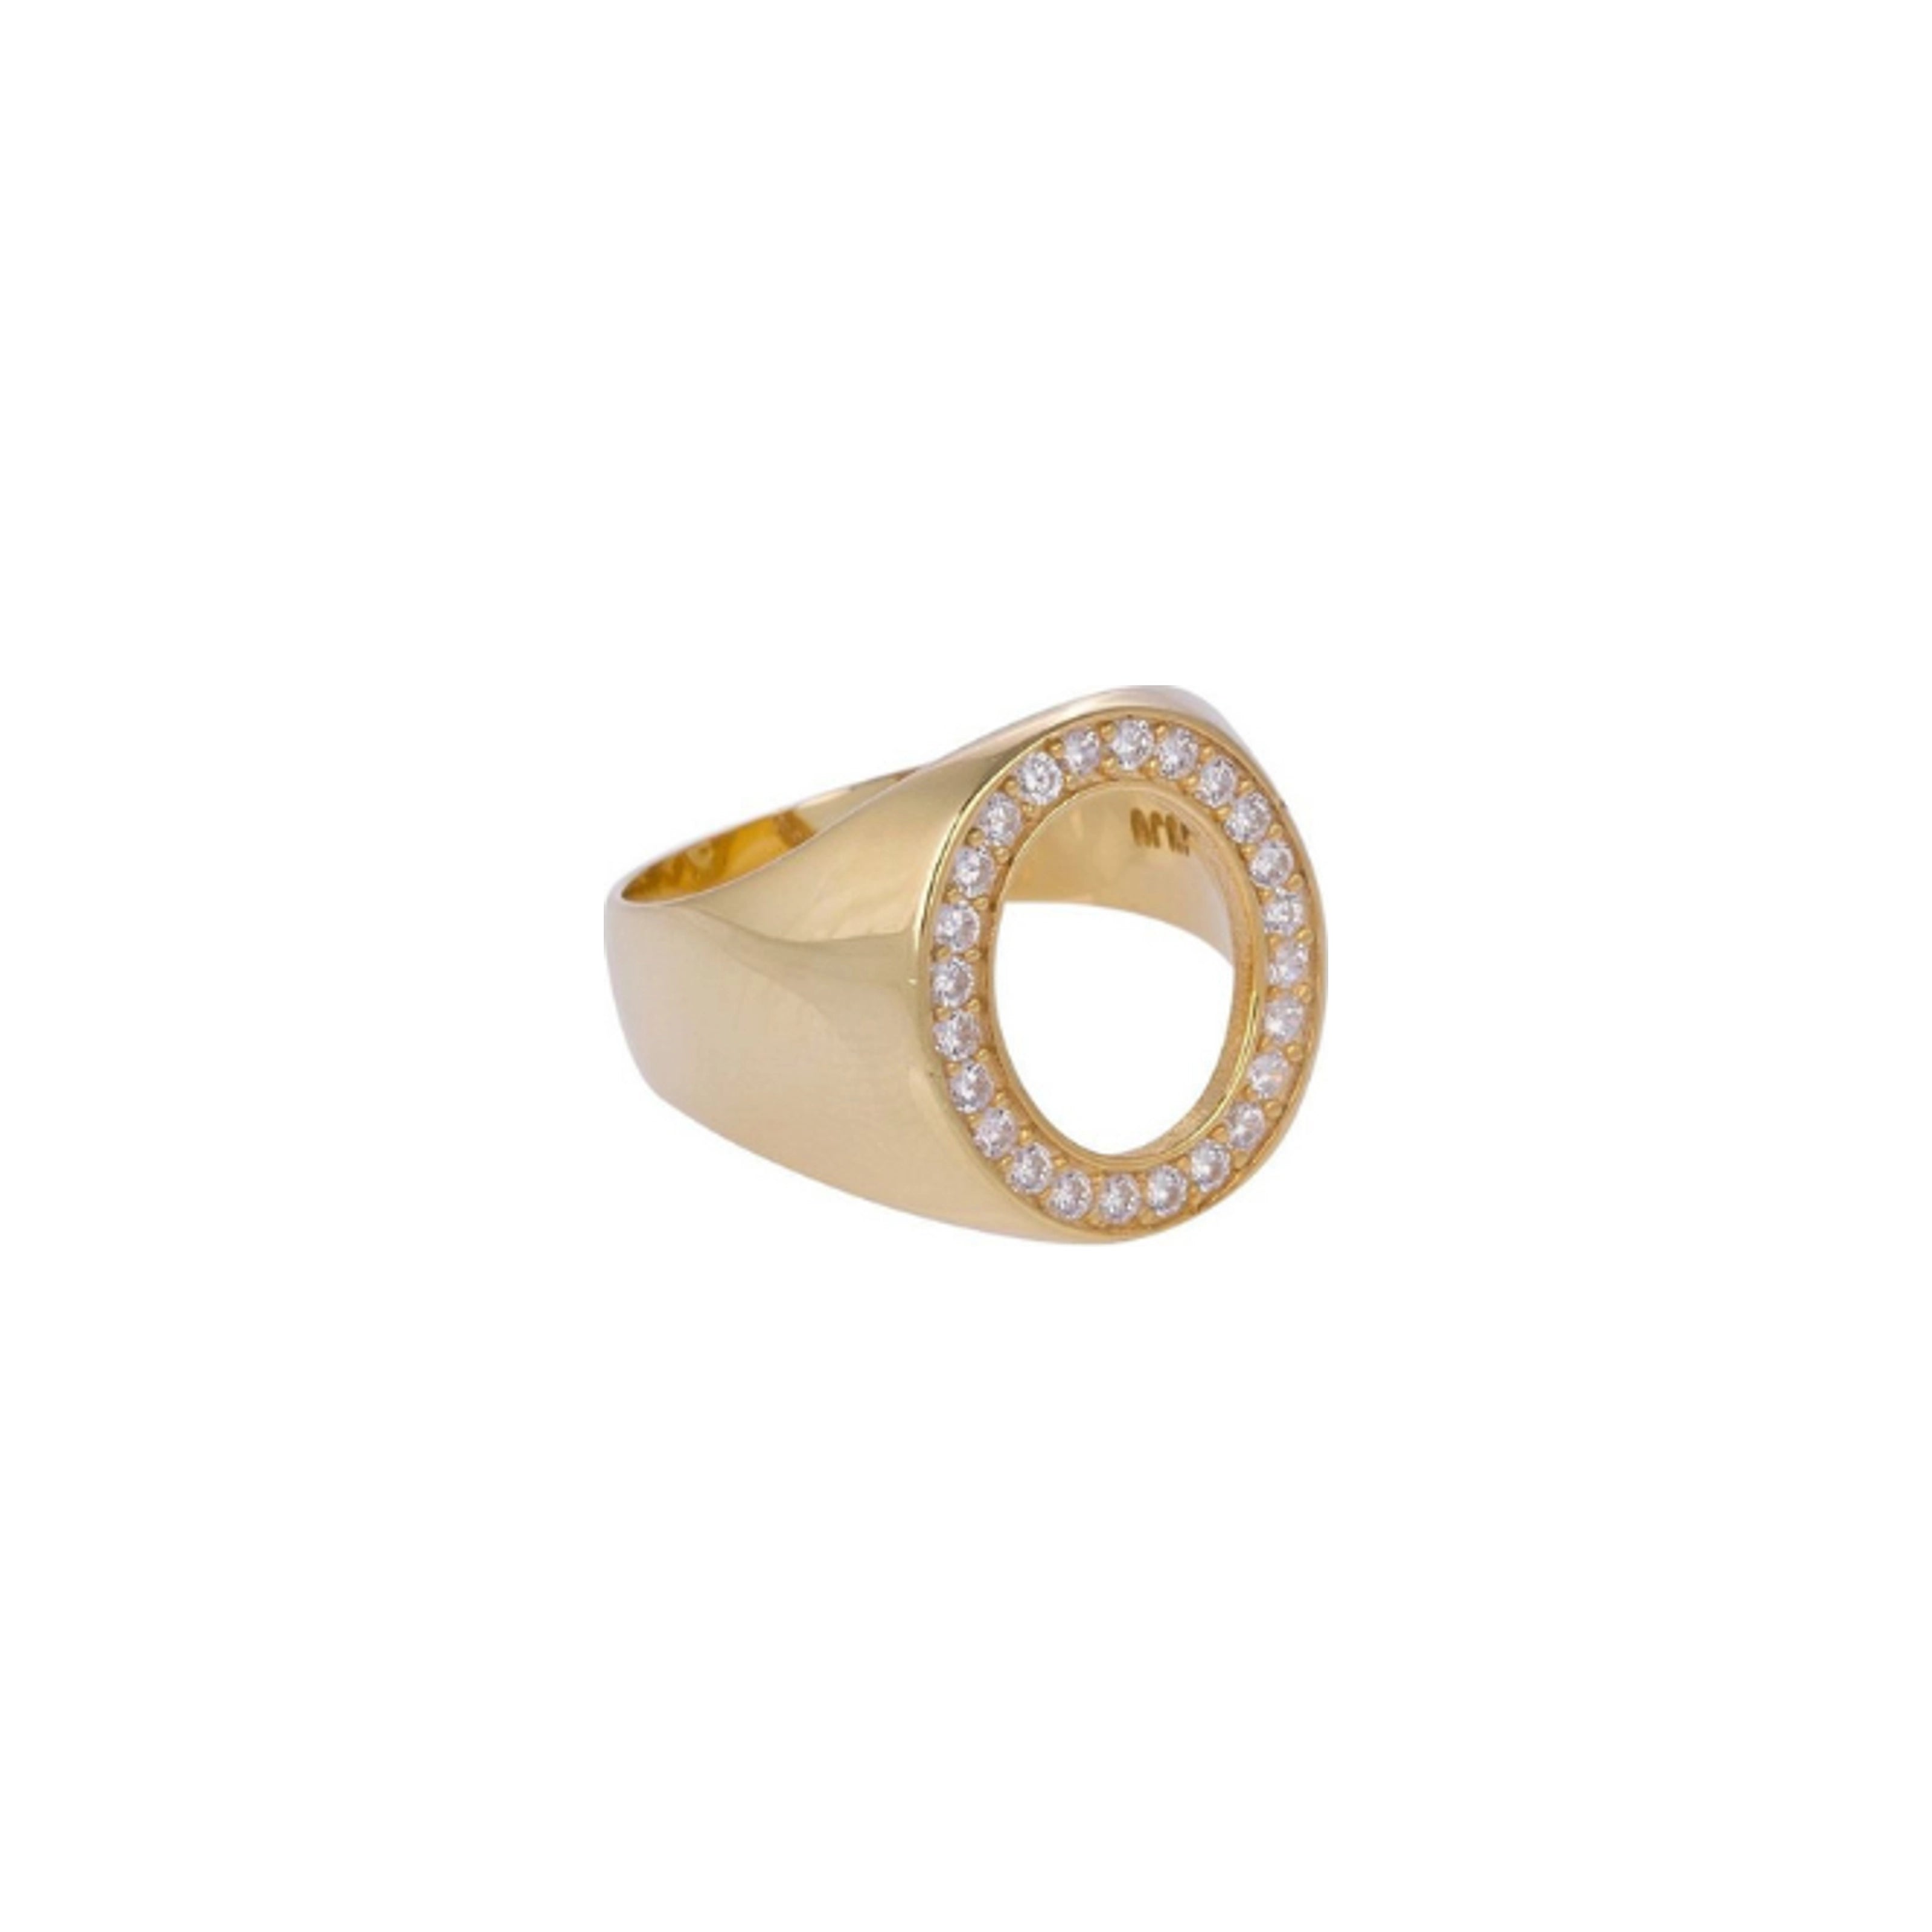 Oval Ring with Stones